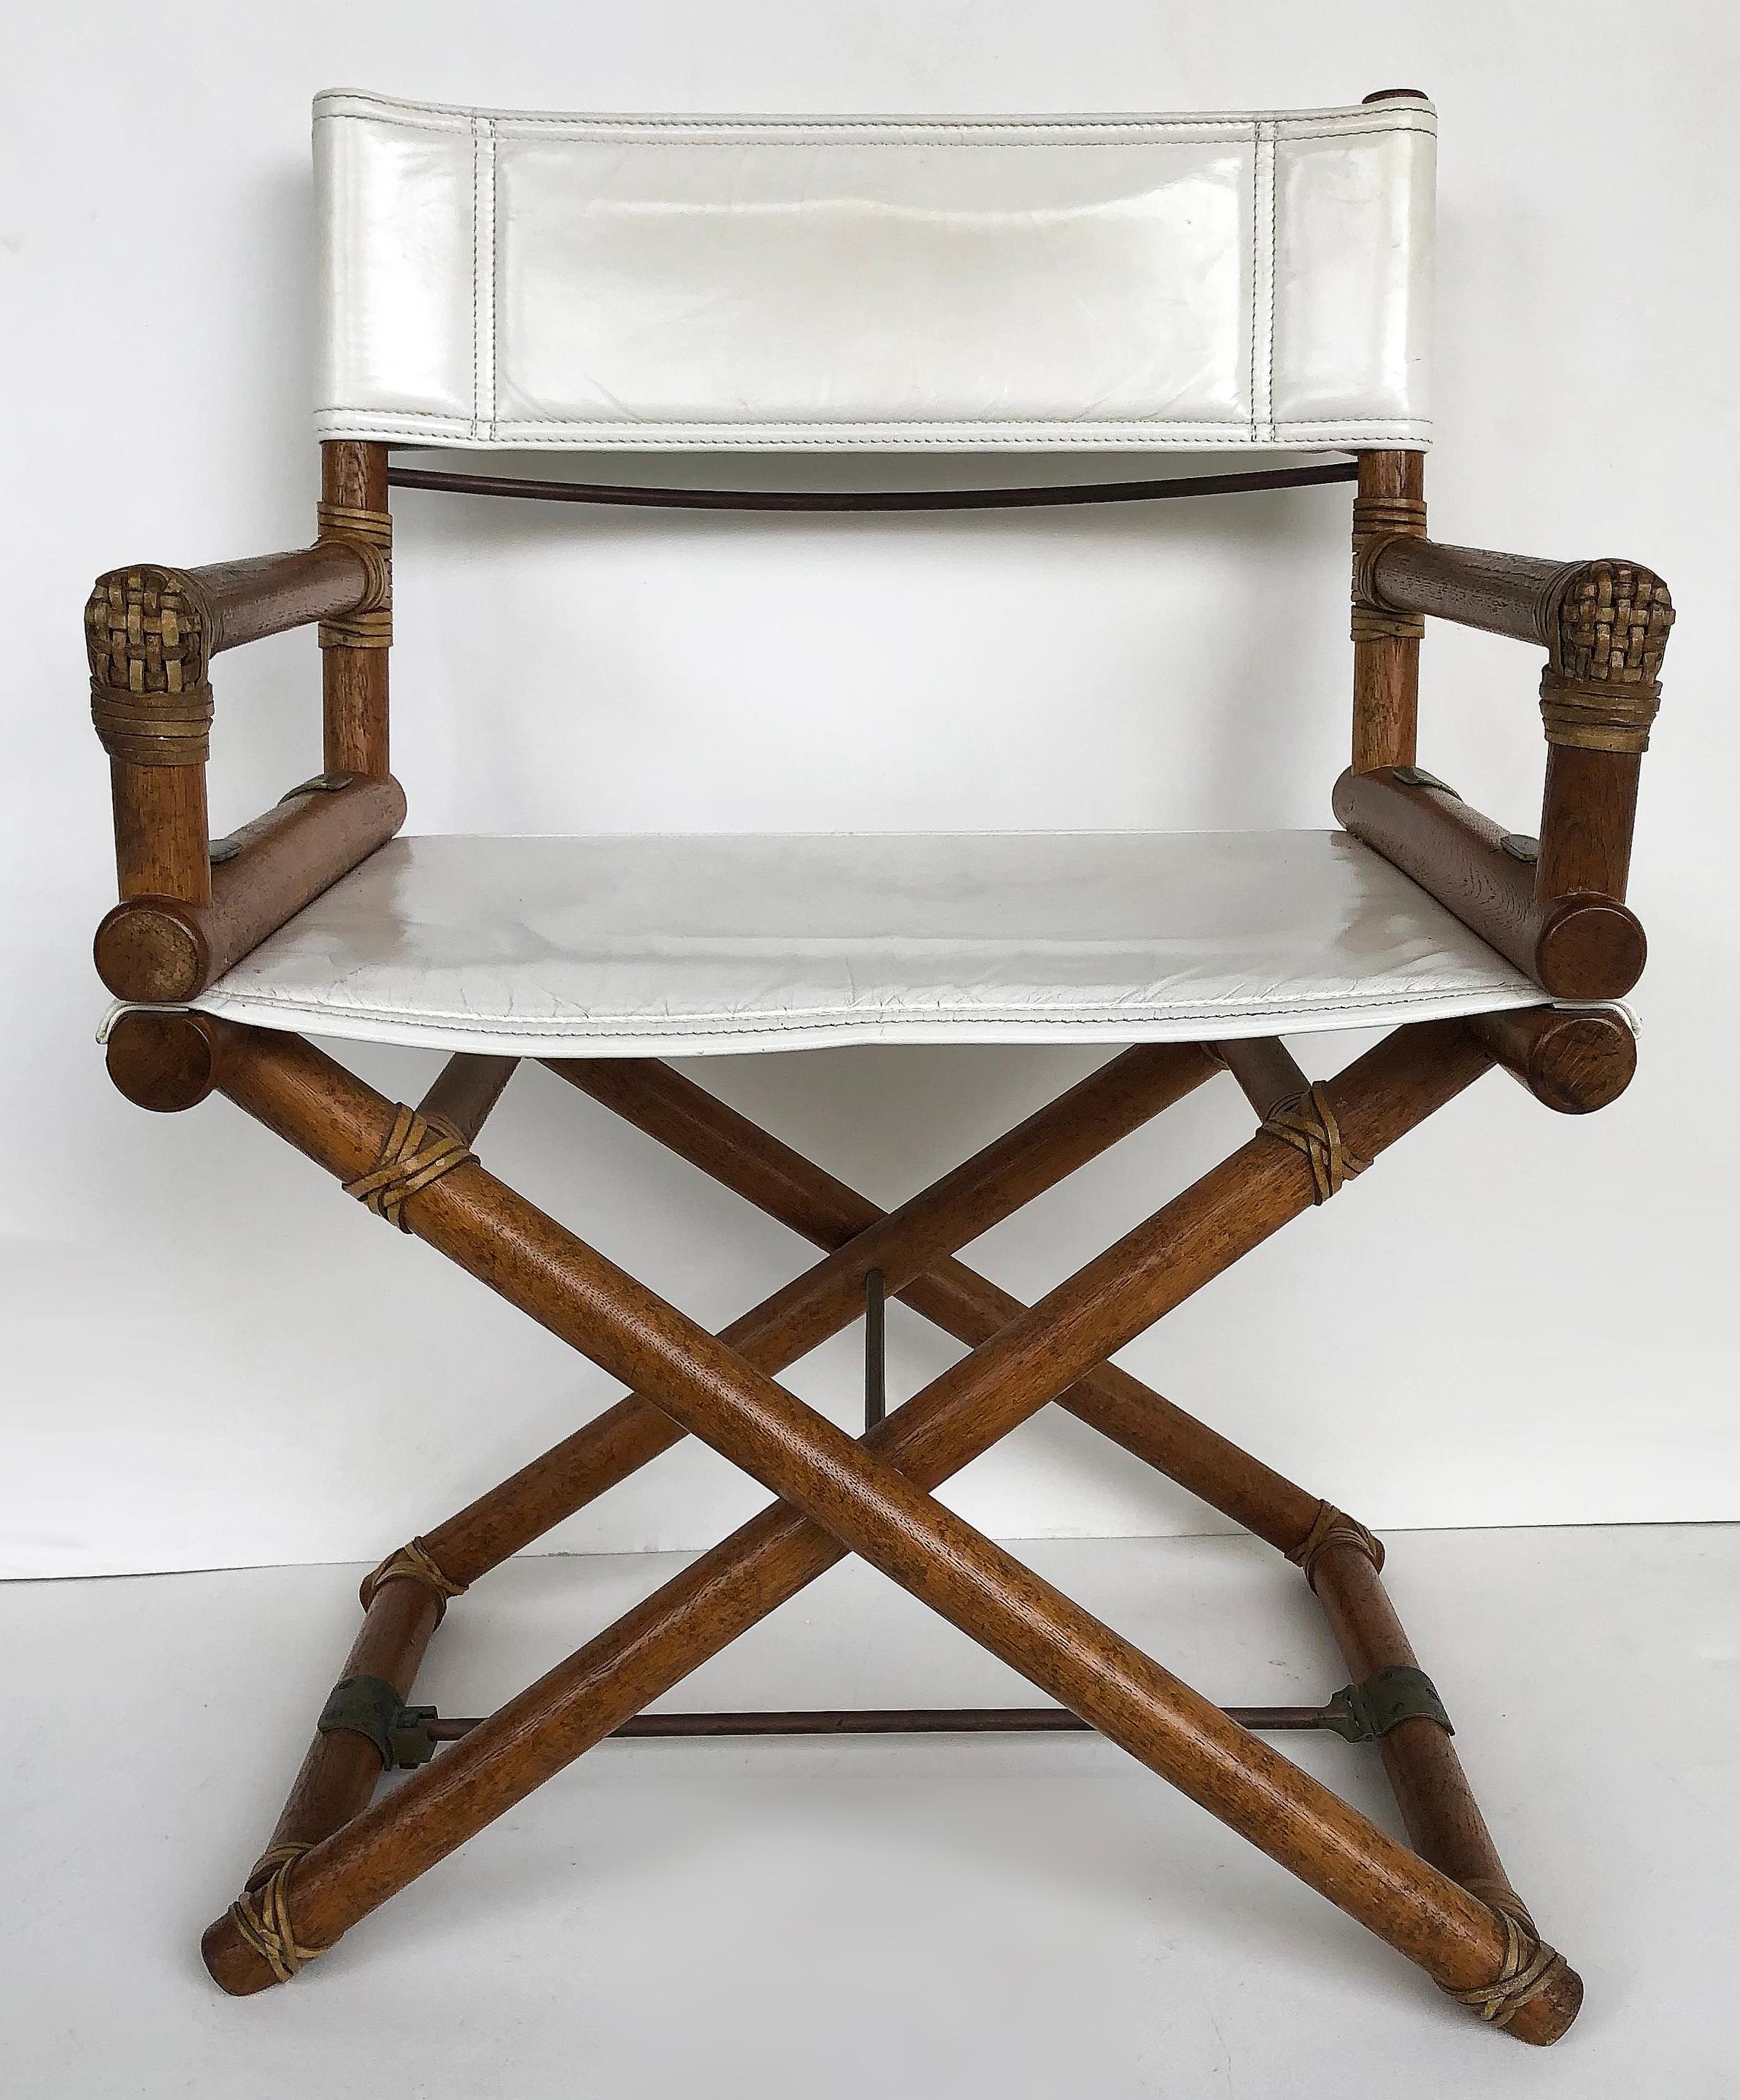 McGuire San Francisco Oak Director's chair, leather and brass

Offered for sale is a fine quality oak, leather, and brass director's chair from McGuire Furniture of San Francisco. McGuire director chairs were first designed by Leonard Linden for